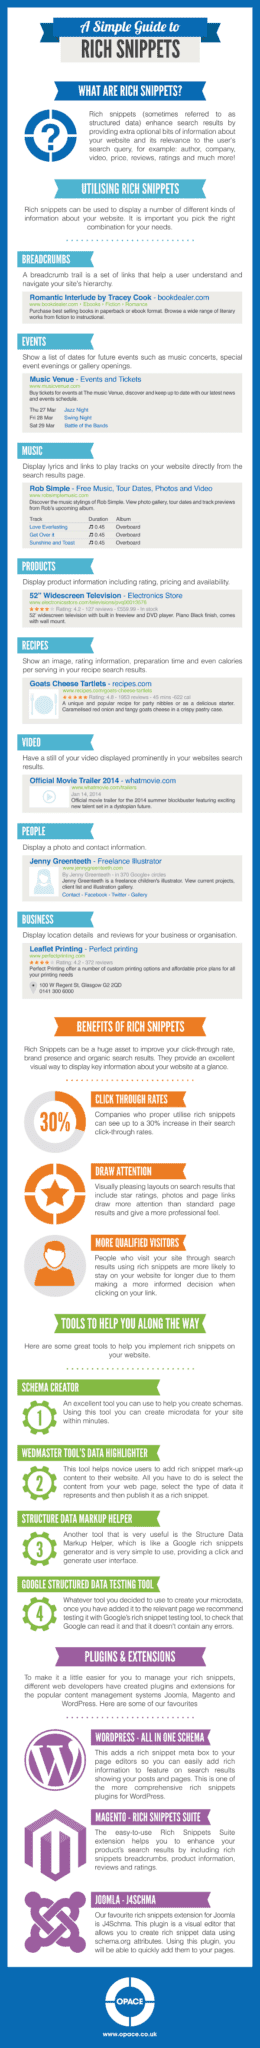 Simple guide to Rich Snippets tools and benefits infographic including Joomla Magento and WordPress